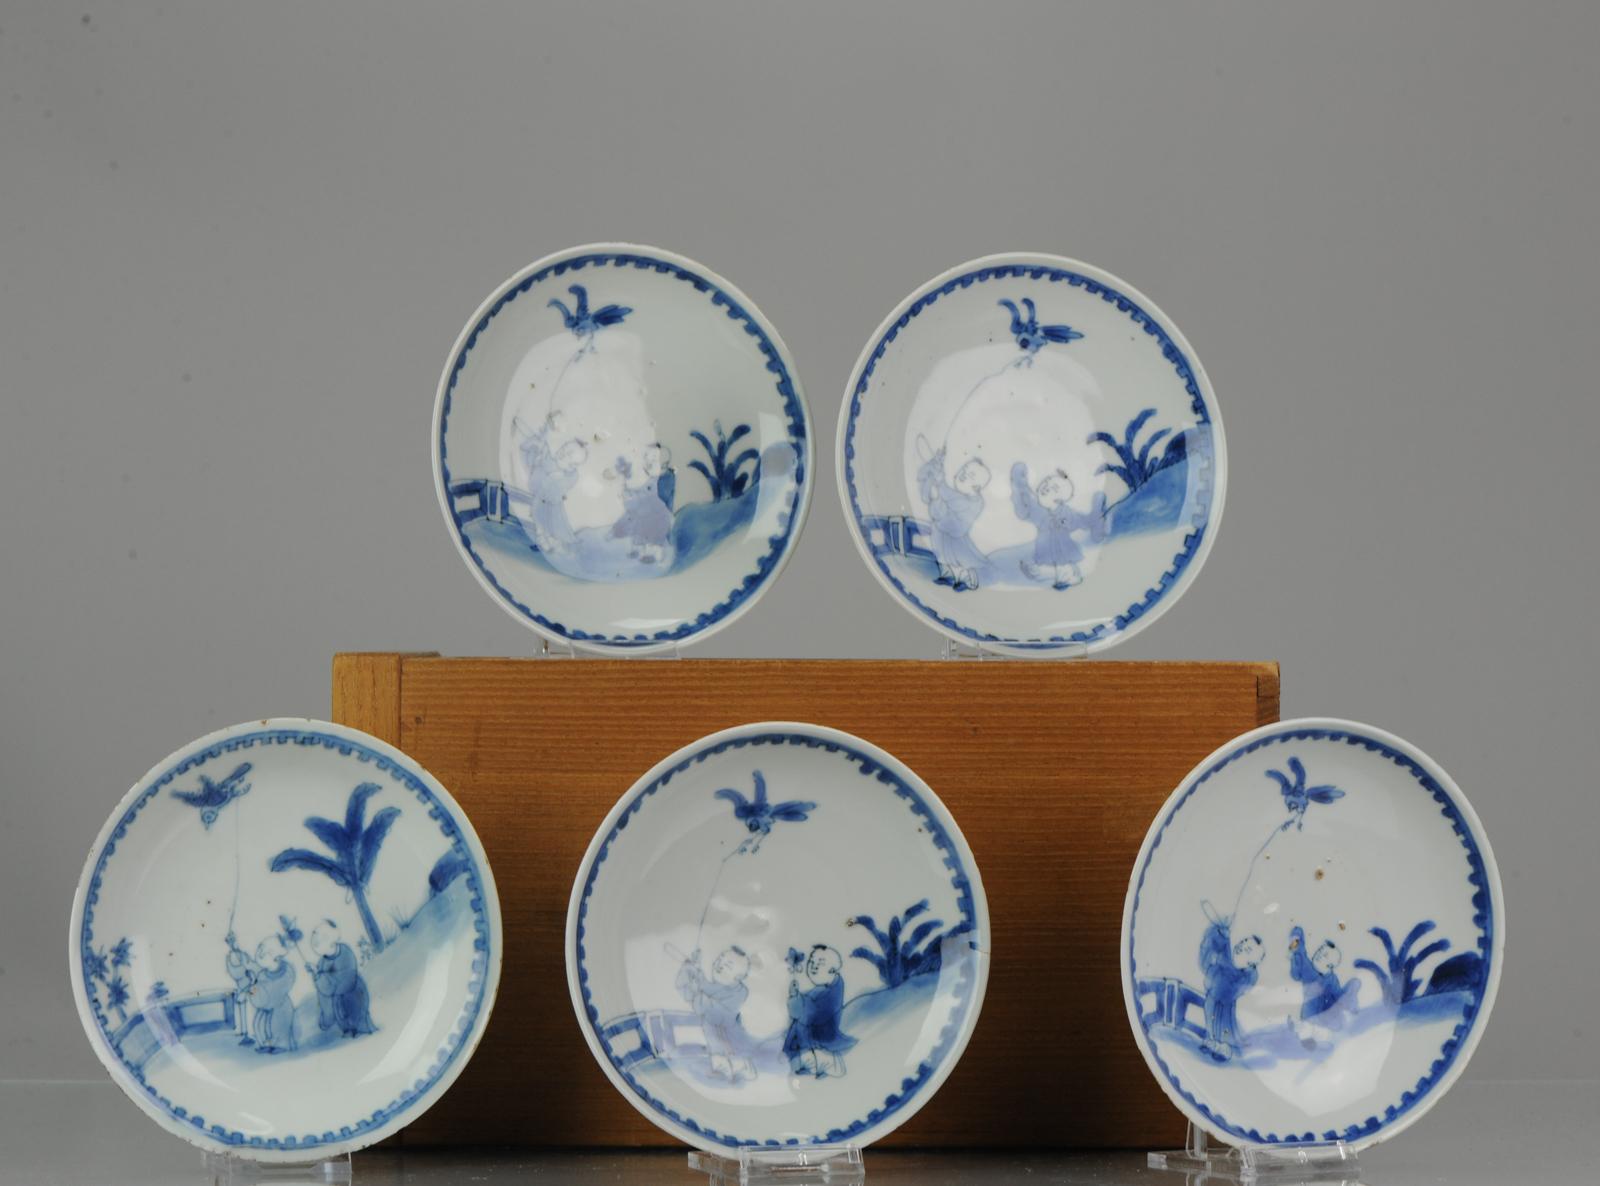 Antique Kaiseki Set of 5 Chinese Porcelain 17th C Kosometsuke Boy and Bird di For Sale 7